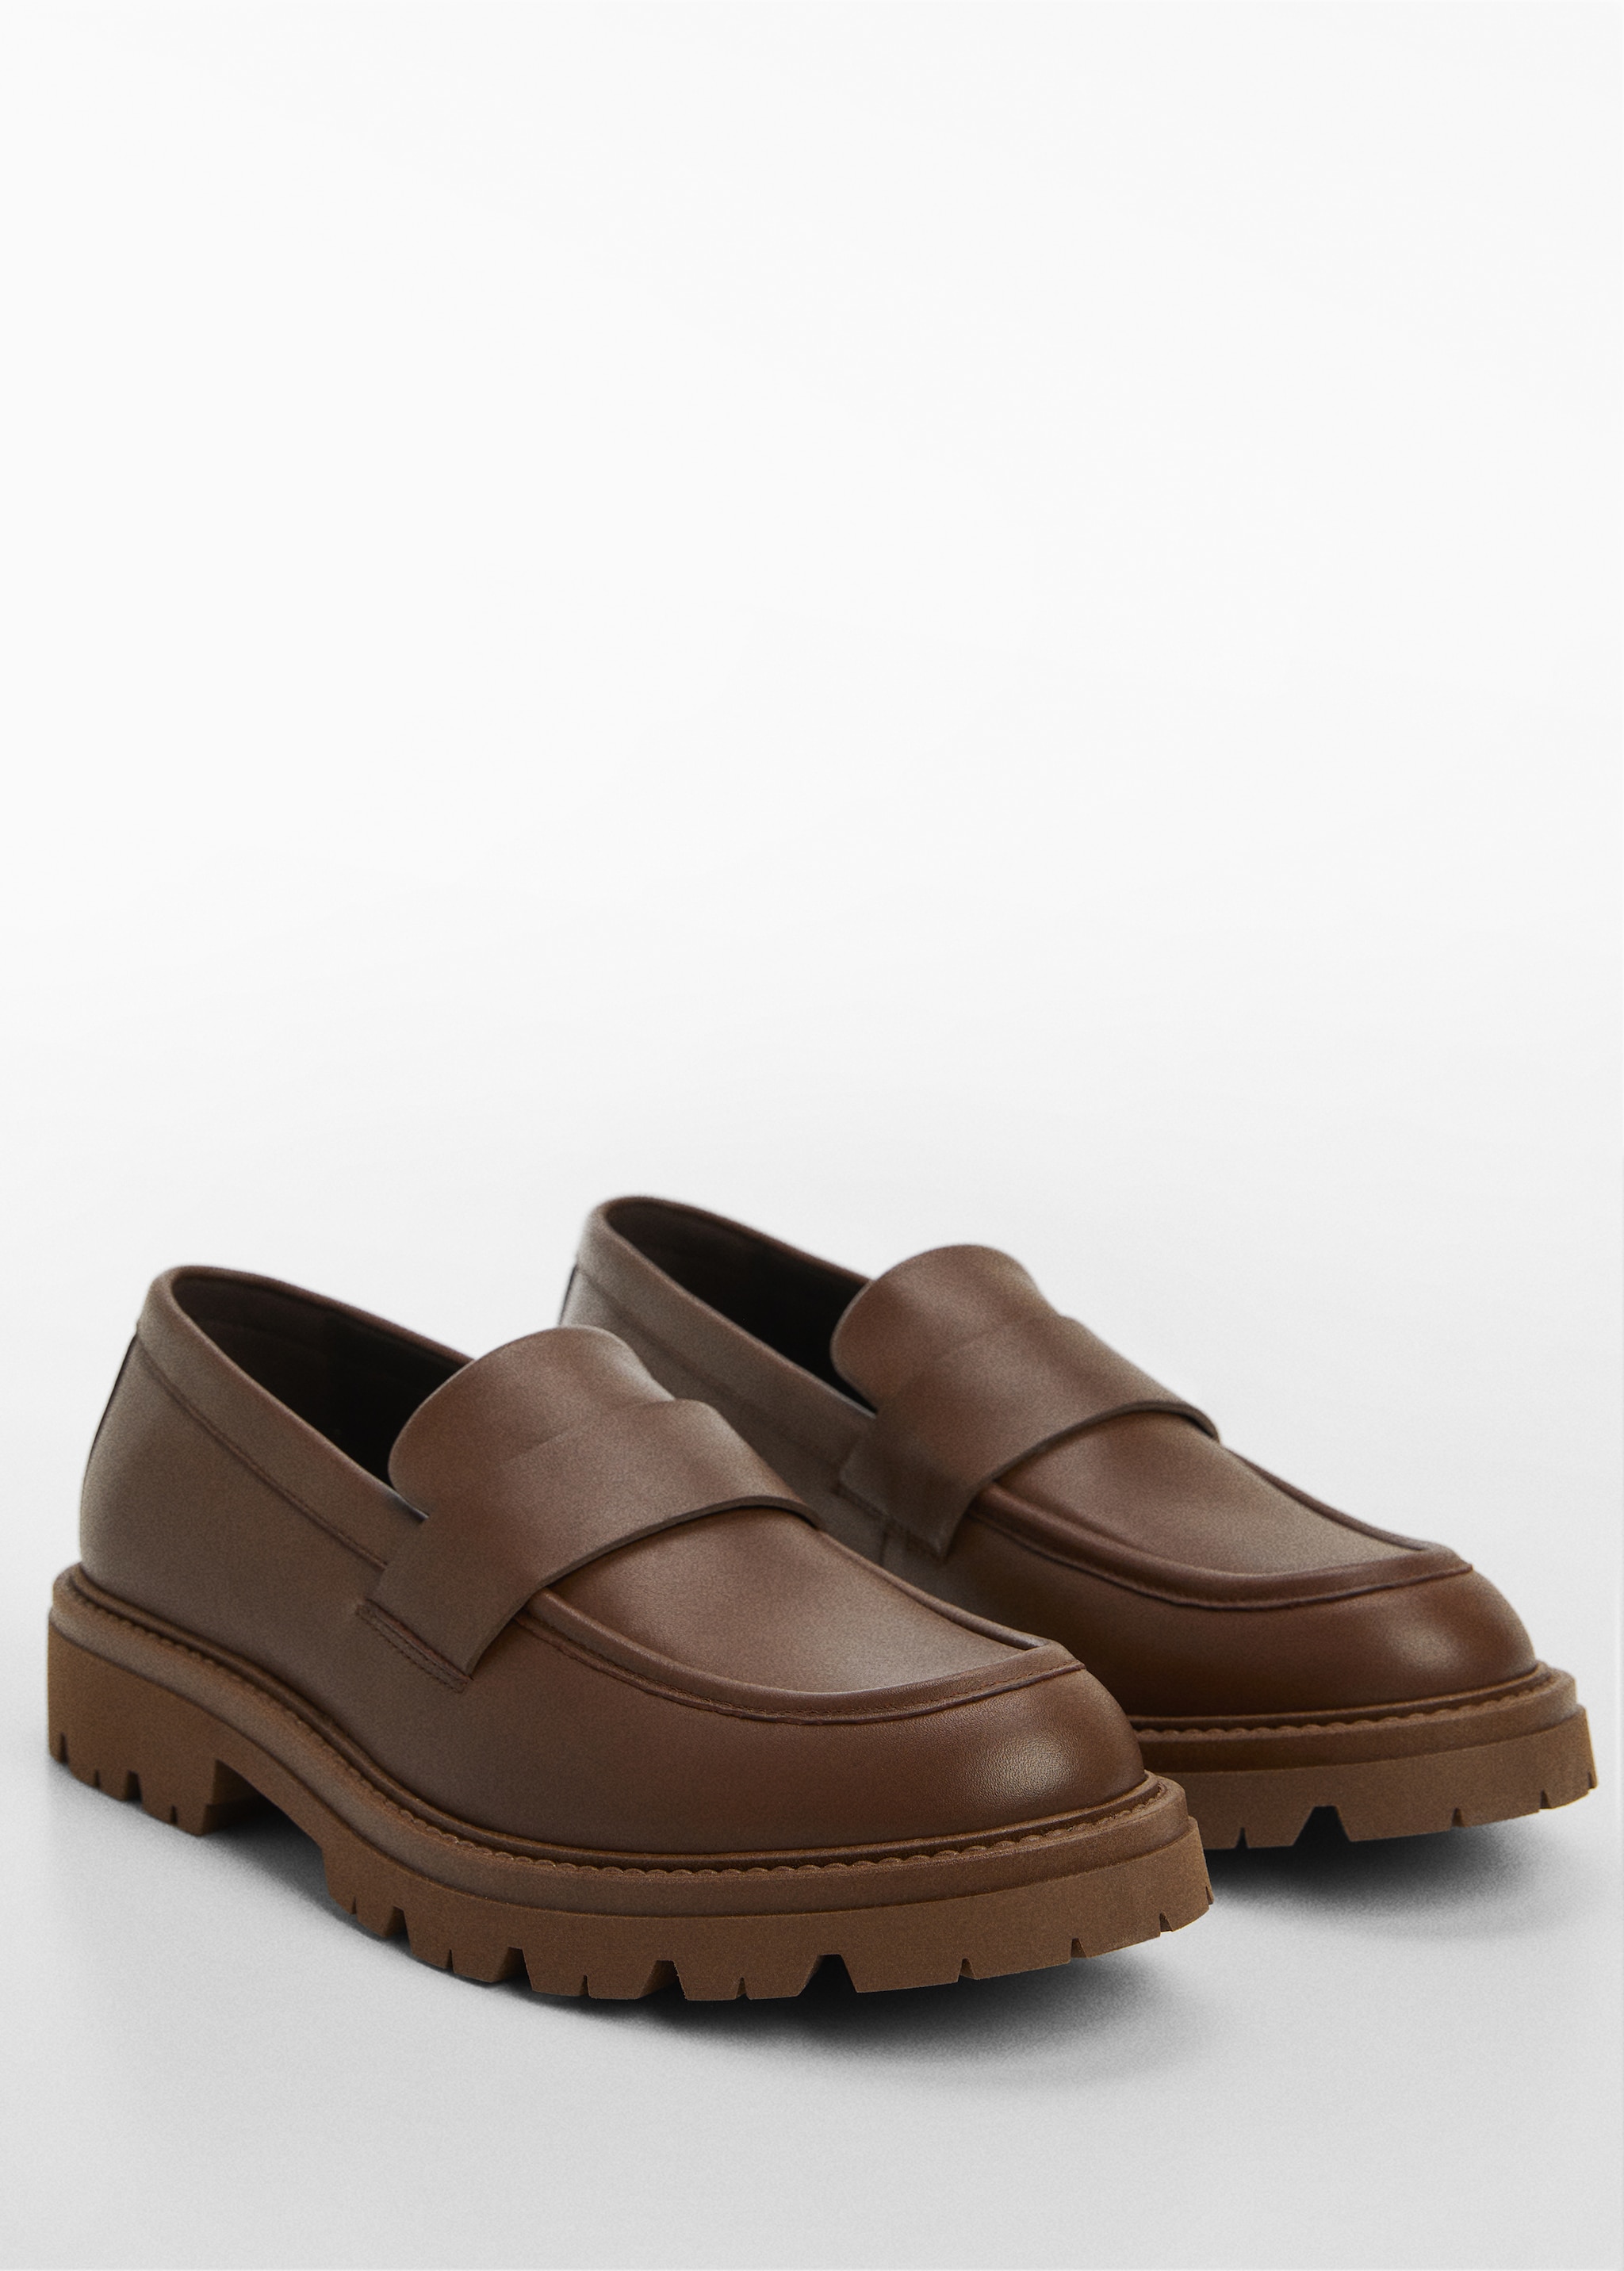 Leather moccasin with track sole - Medium plane